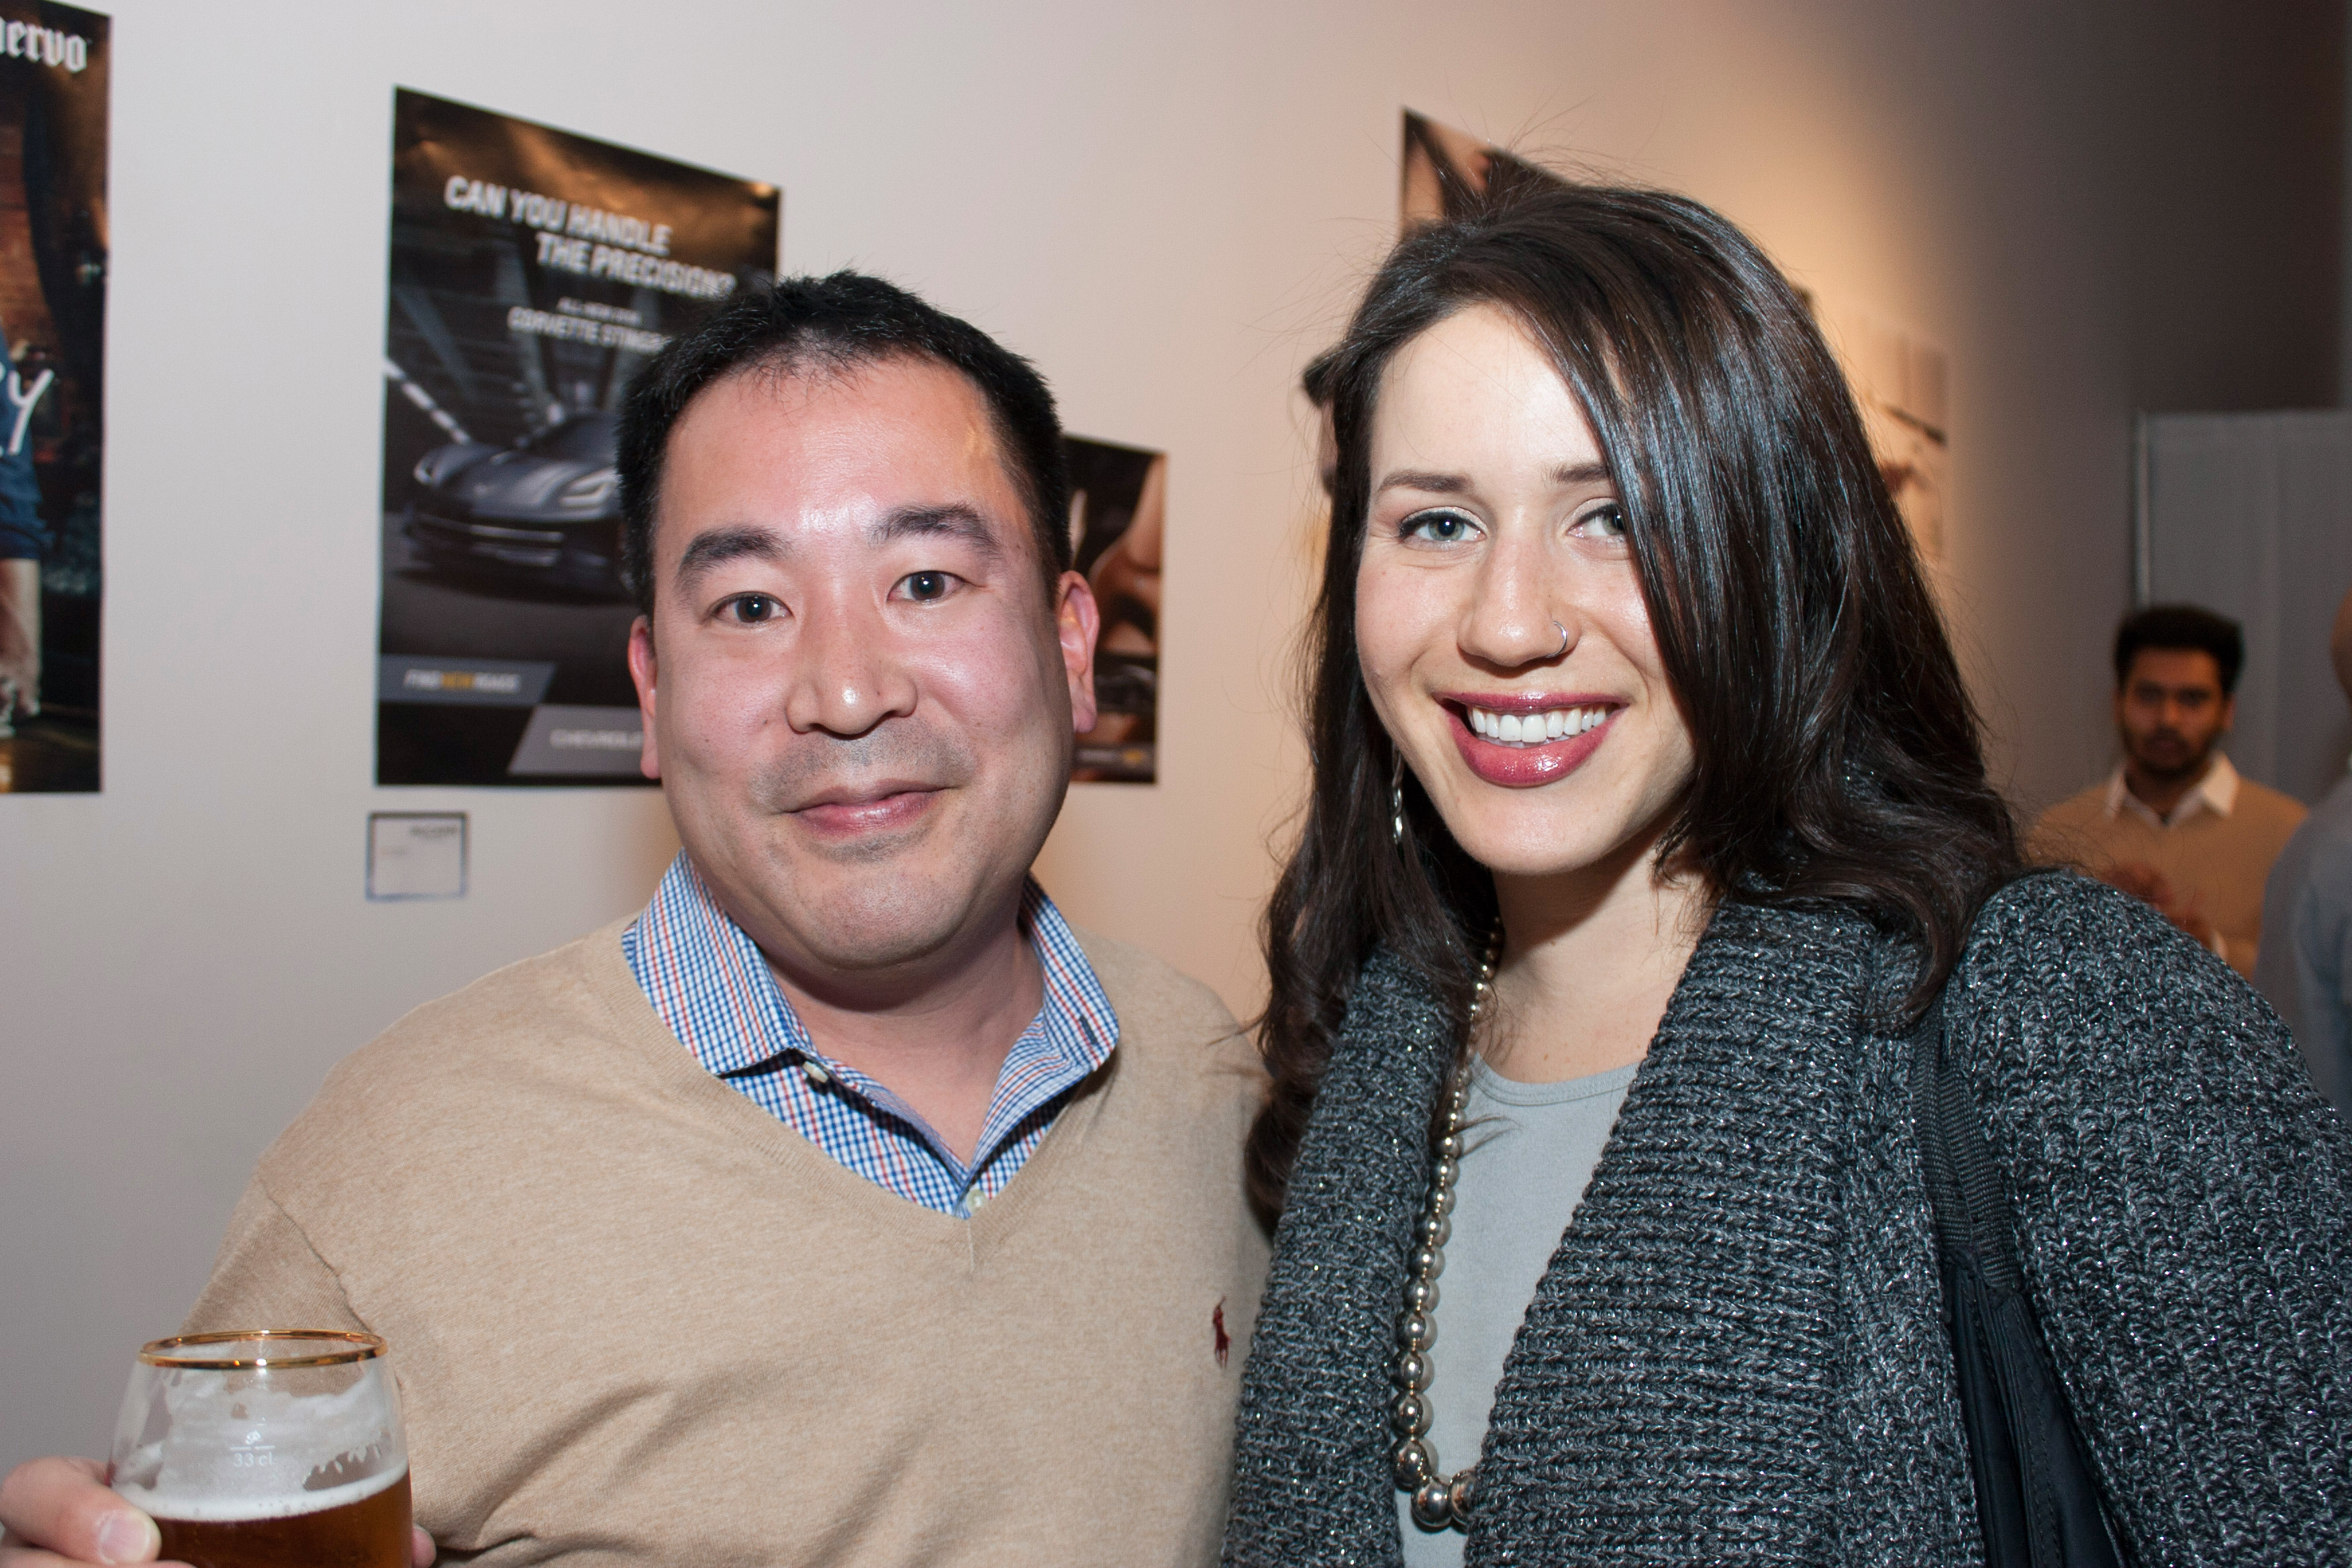 2013 New York State of Mind Exhibition and Holiday Party